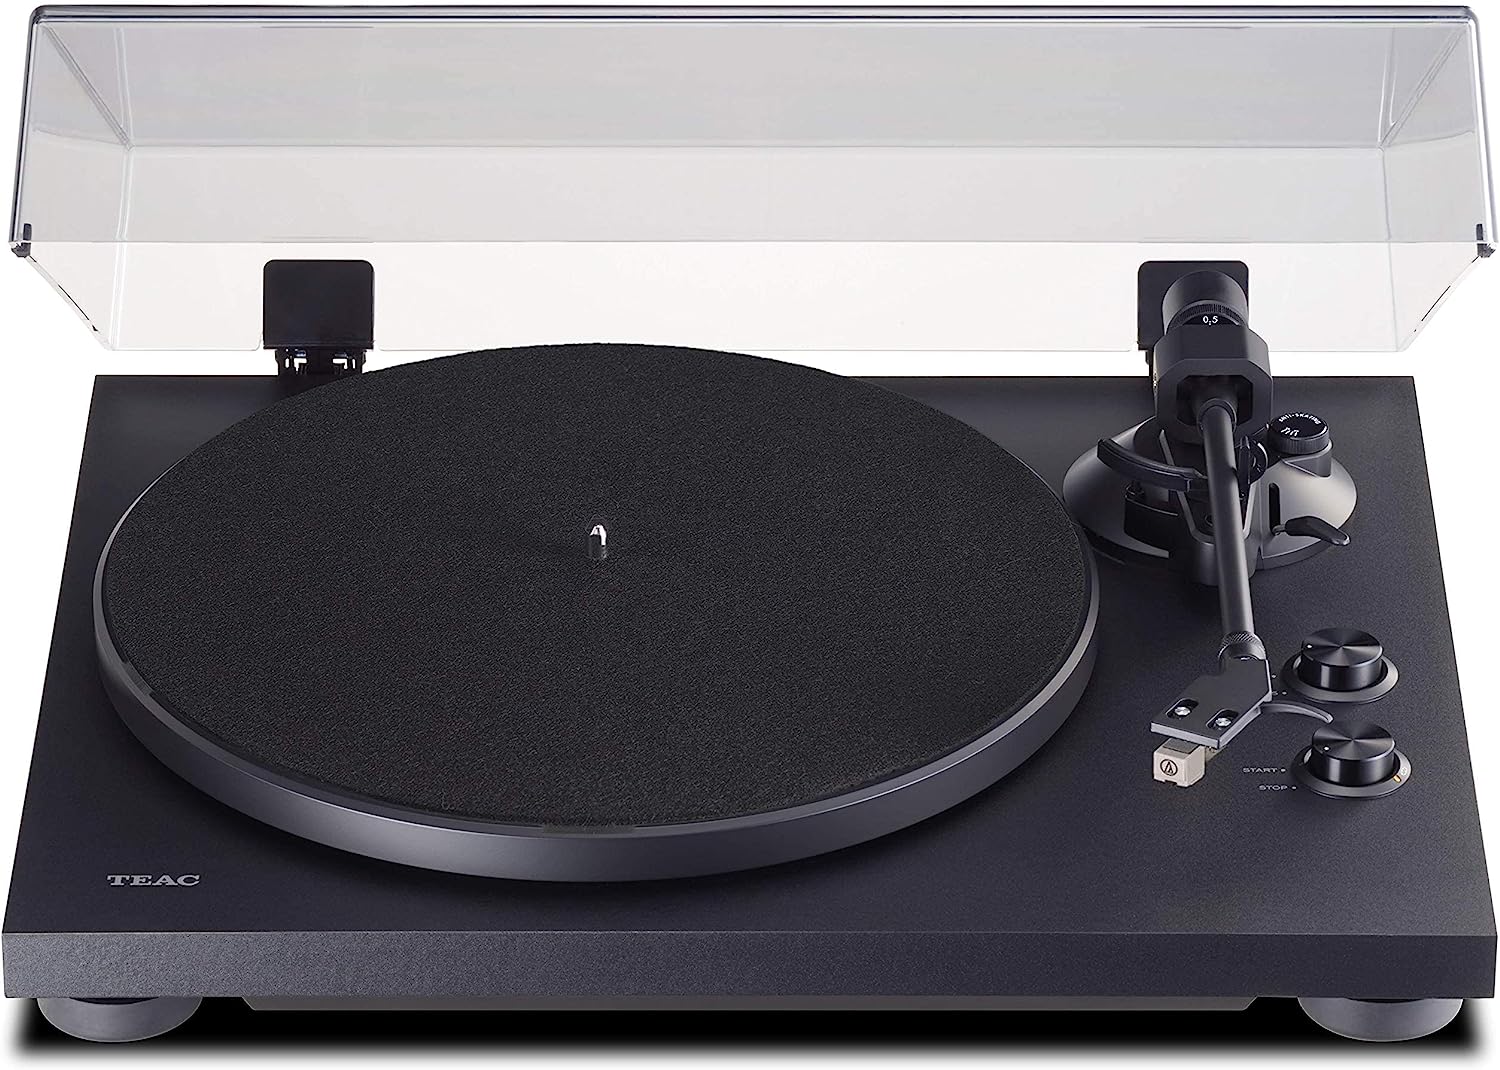 Teac TN-280BT-A3 Turntable Review